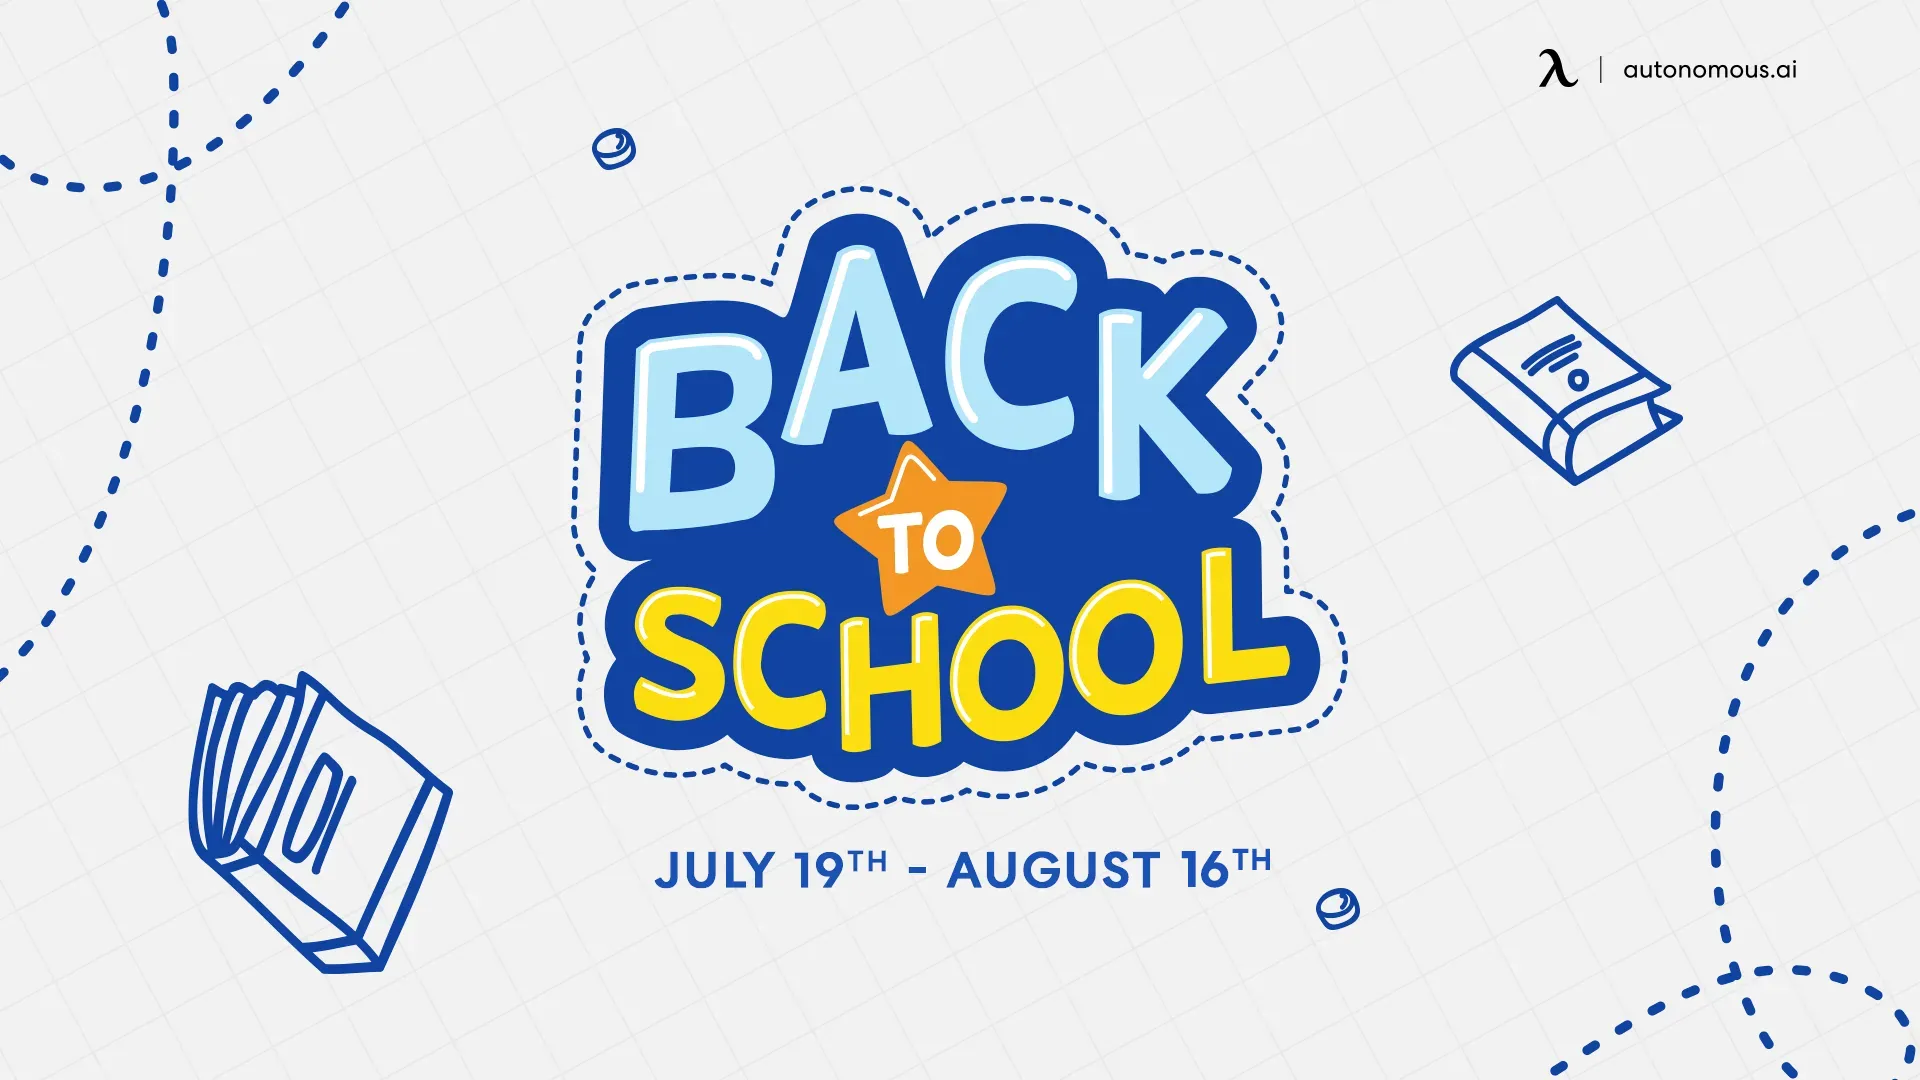 Back to School Deals Coming Up